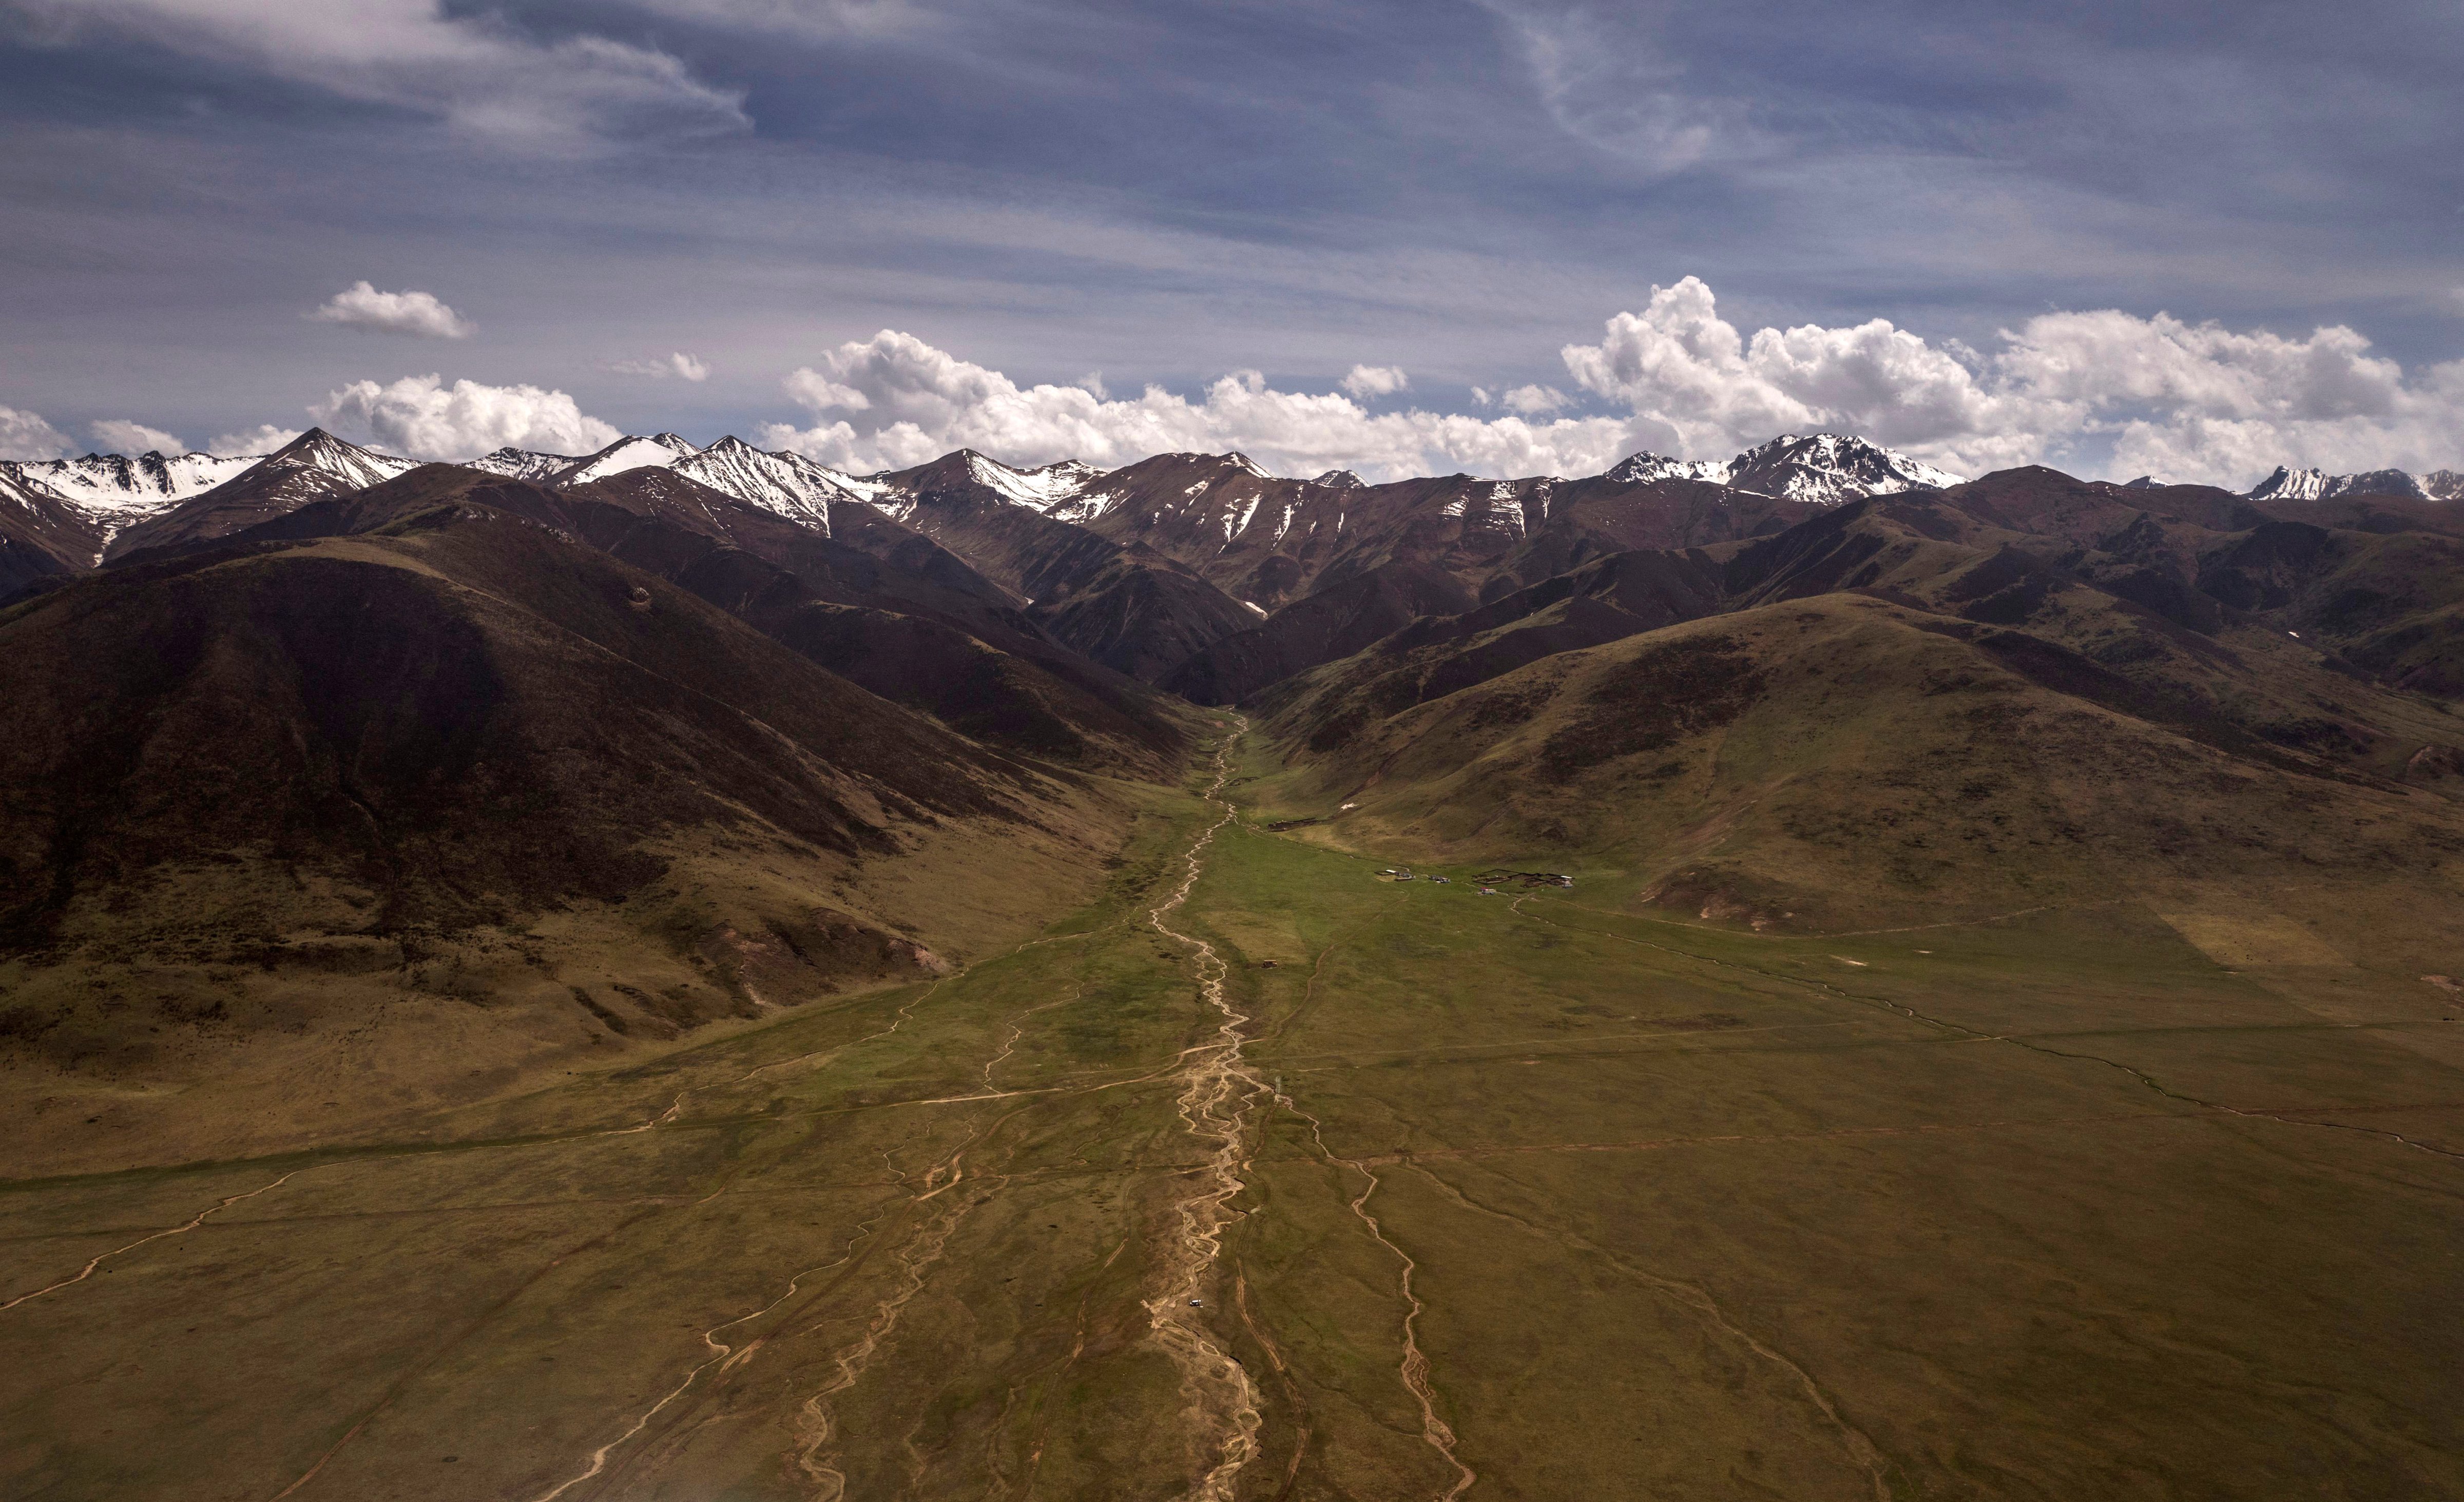 The mountains and grasslands of the Tibetan Plateau are seen from the air in the Yushu Tibetan Autonomous Prefecture of Qinghai province on May 24, 2016 in Yushu, China. (Kevin Frayer—Getty Images)